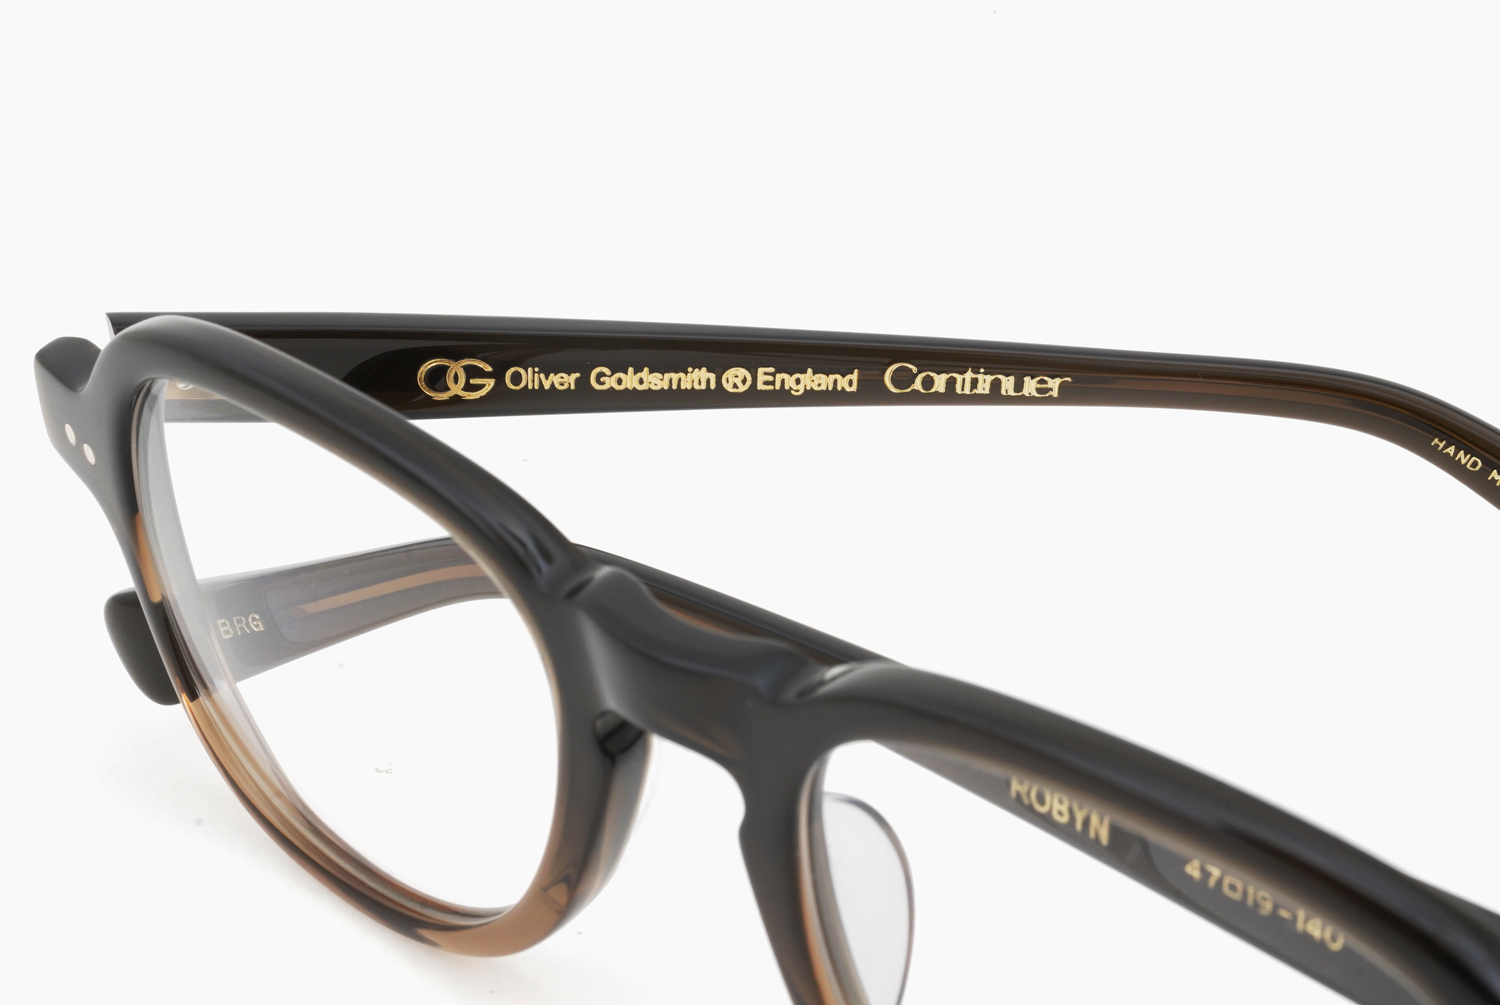 OLIVER GOLDSMITH for Continuer | ROBYN - BRG｜OLIVER GOLDSMITH